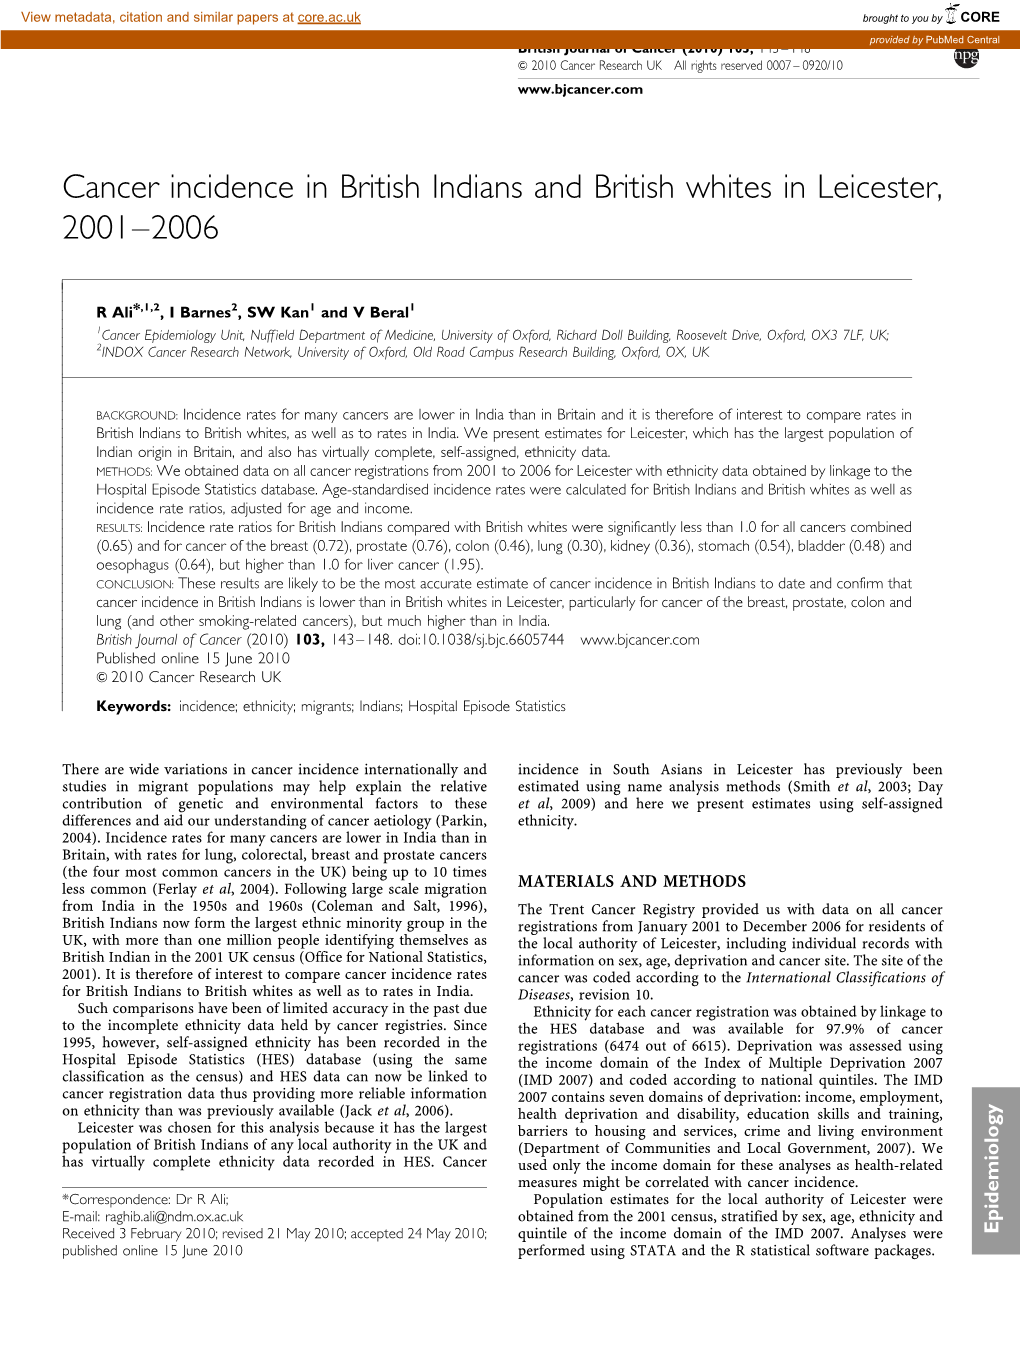 Cancer Incidence in British Indians and British Whites in Leicester, 2001–2006